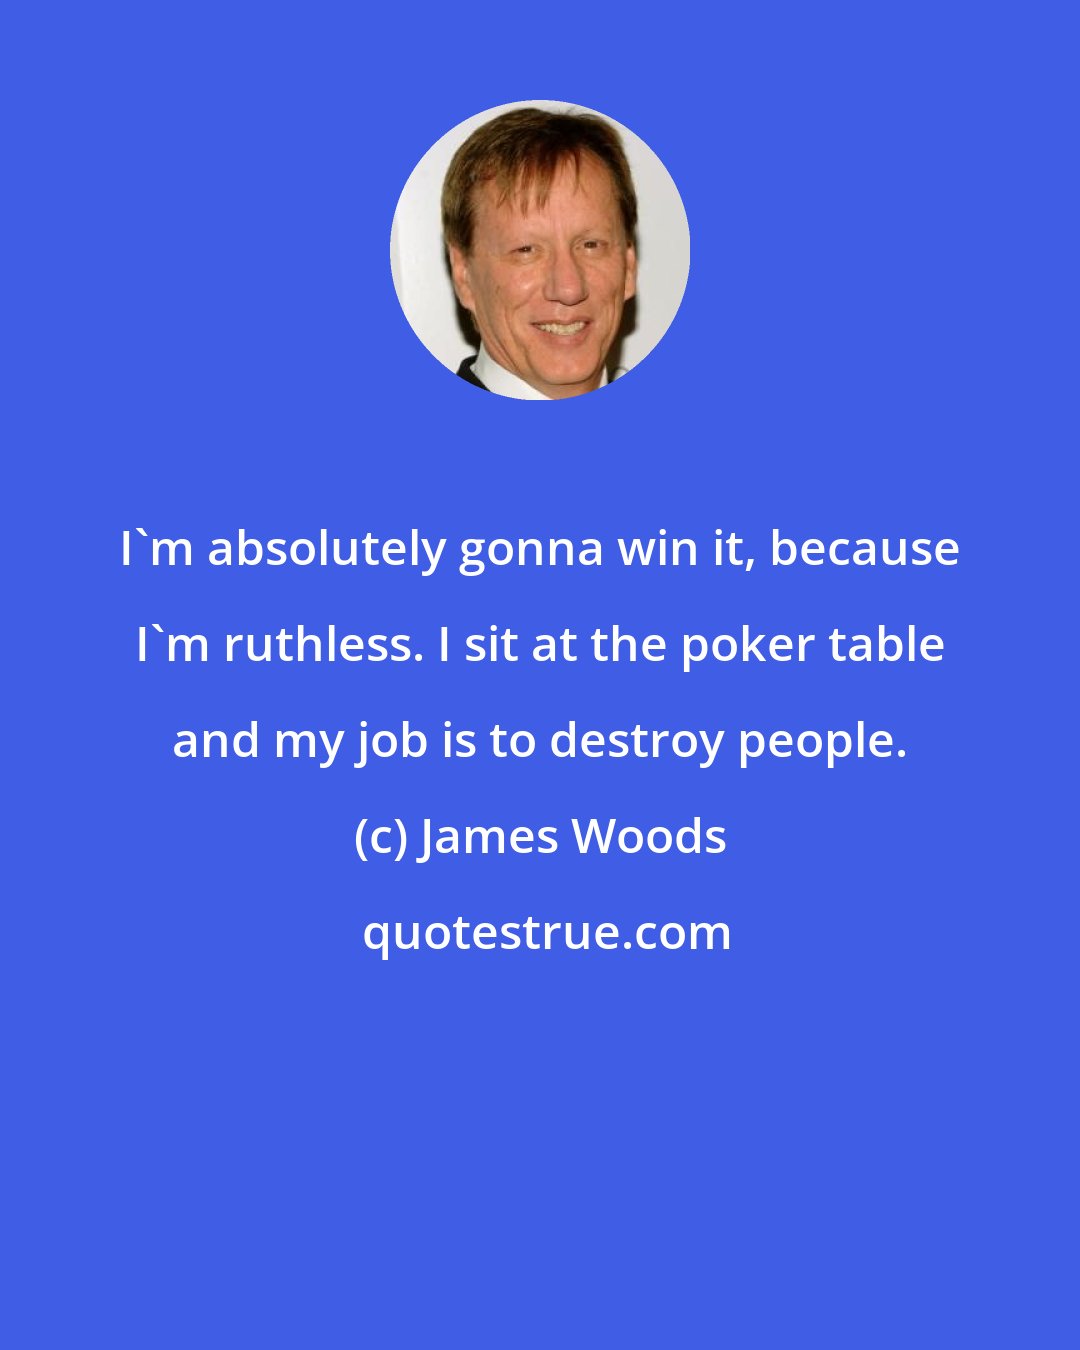 James Woods: I'm absolutely gonna win it, because I'm ruthless. I sit at the poker table and my job is to destroy people.